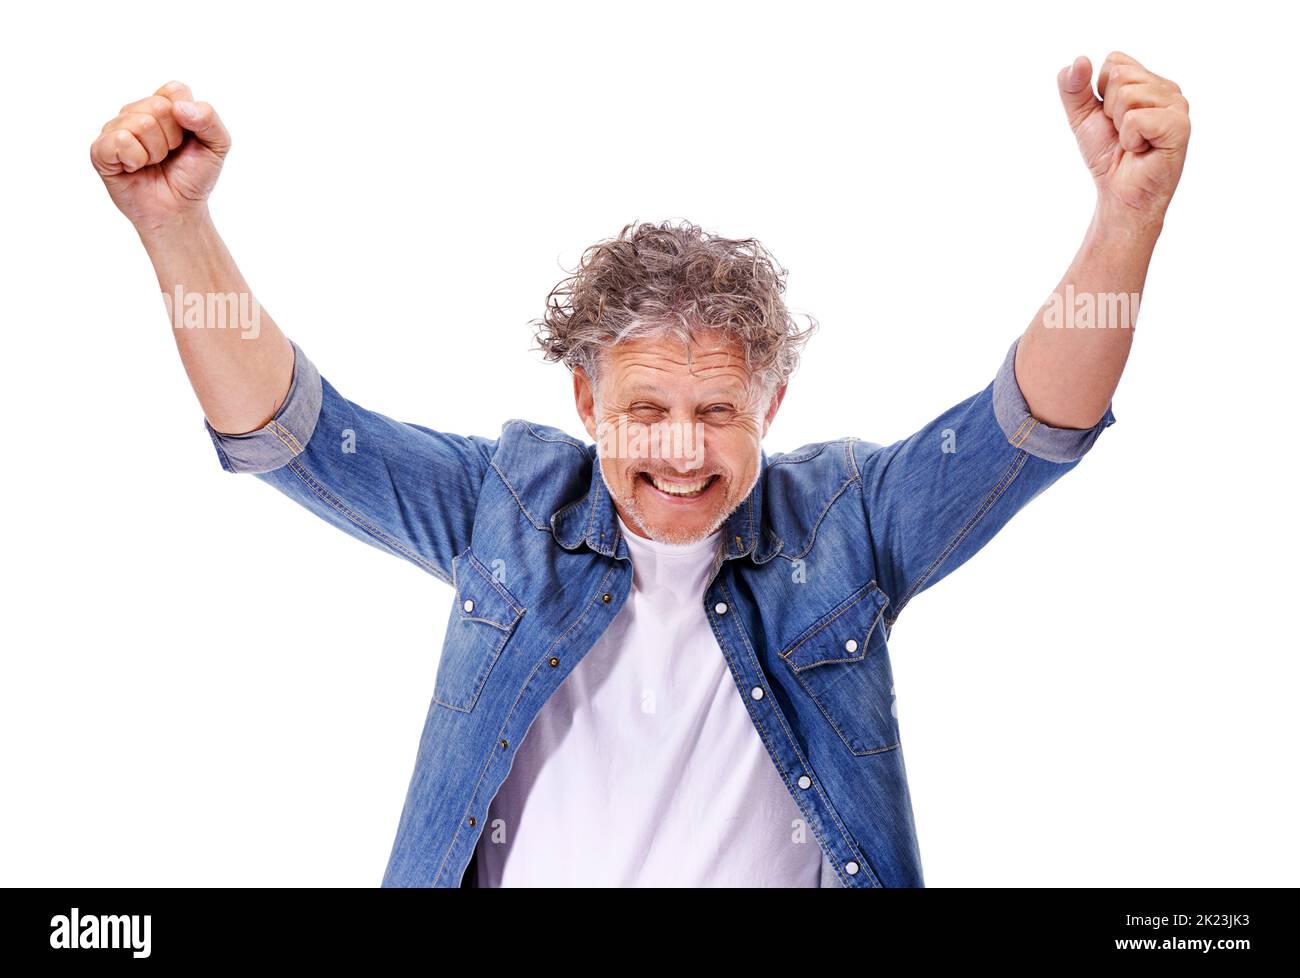 Feeling like a winner. Studio shot of an enthusiastic mature man with his arms raised isolated on white. Stock Photo